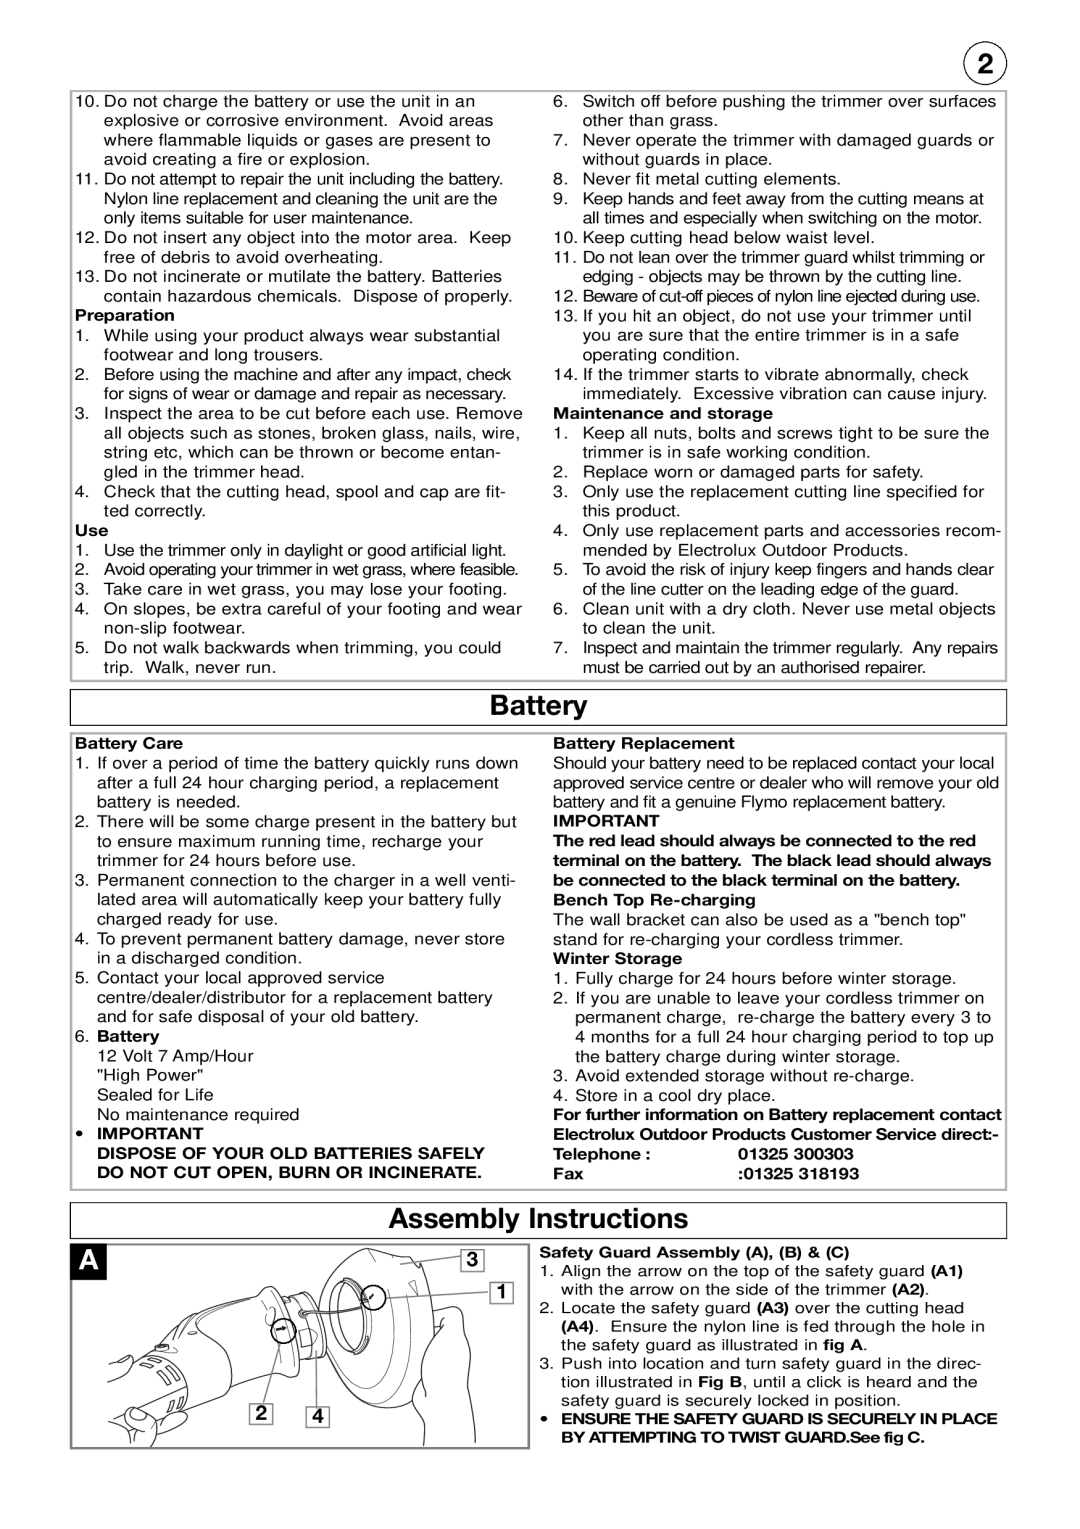 Flymo CT250 manual Battery, Assembly Instructions, 3 1 